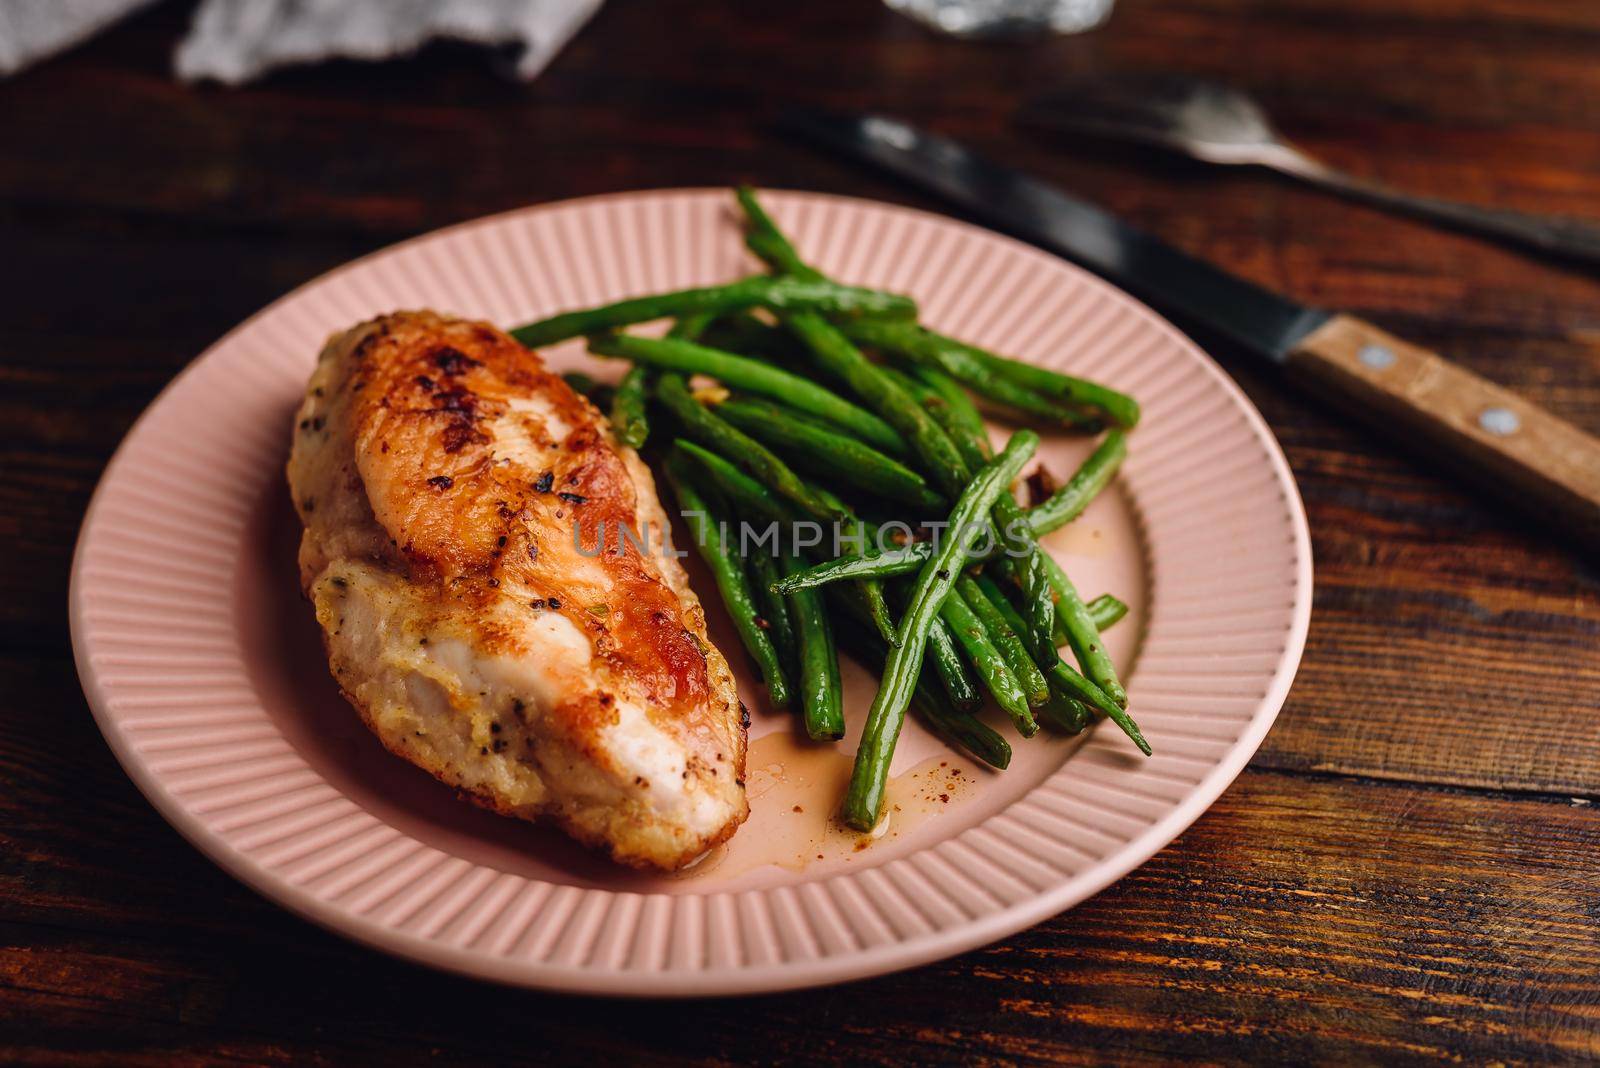 Chicken Breast Baked in Oven and Green Beans Fried with Garlic and Thyme on Plate